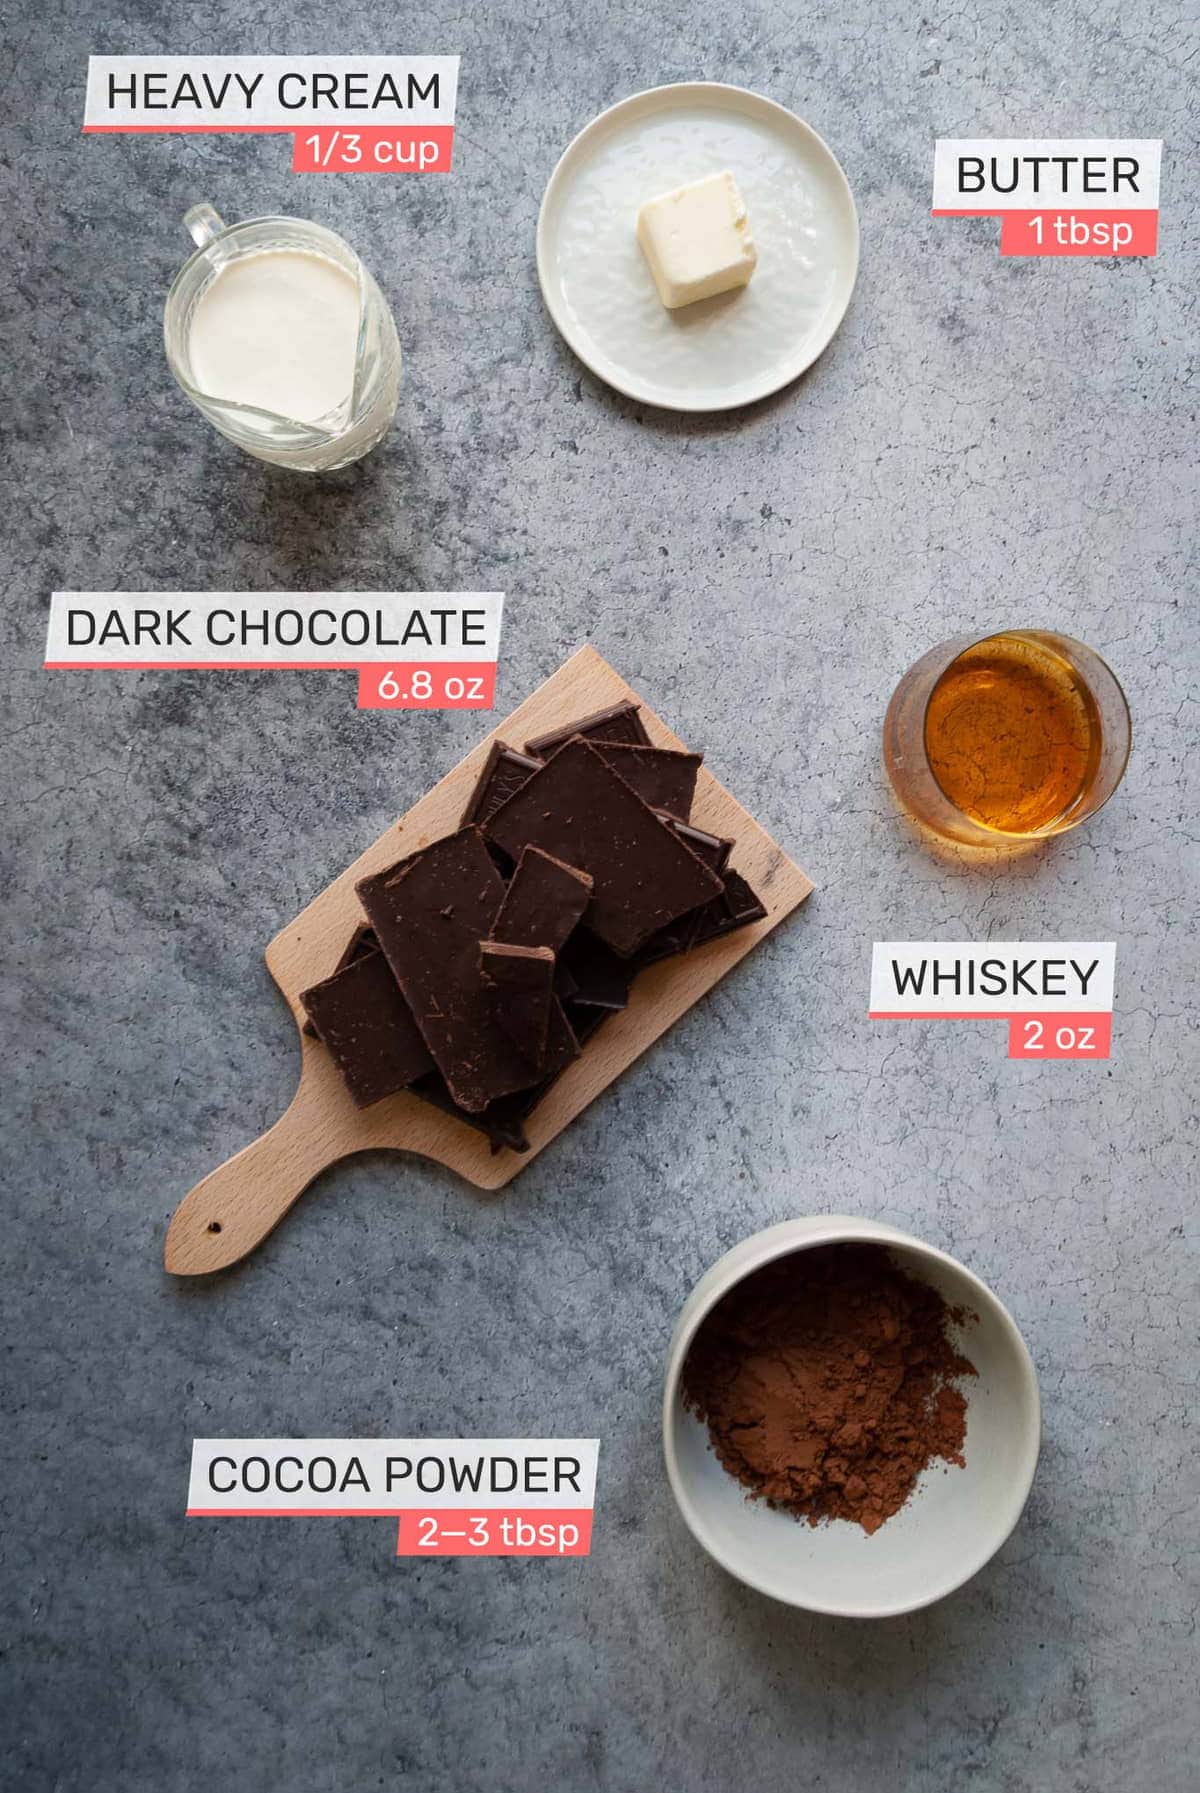 milk, butter, chocolate, whiskey, and cocoa powder